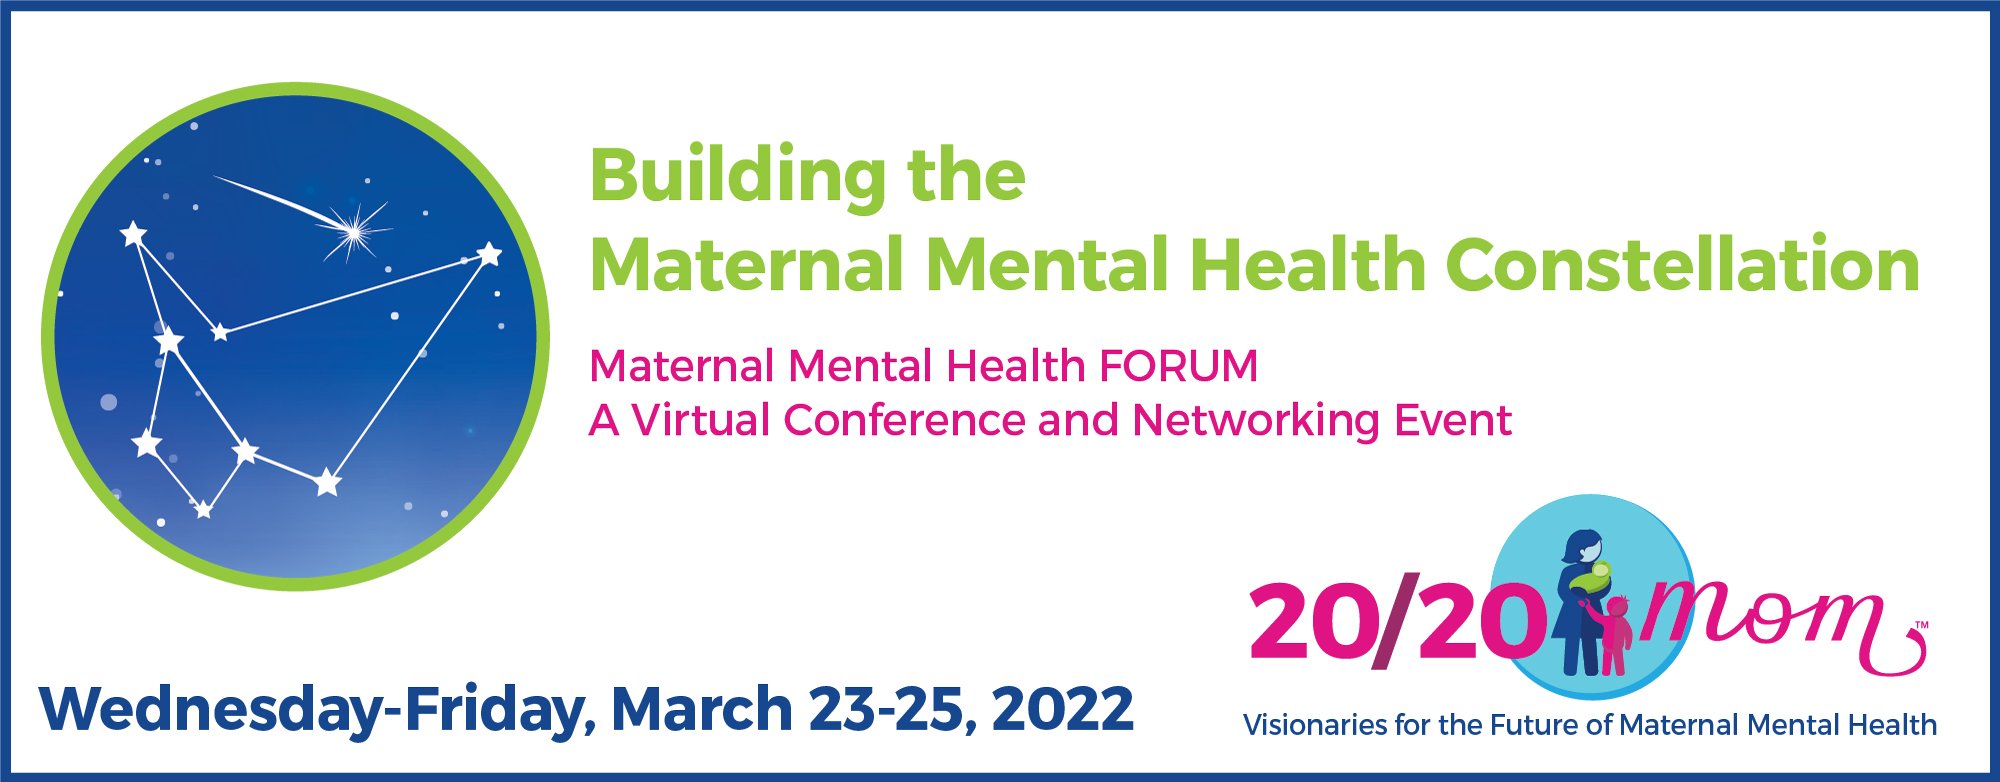 Building the Maternal Mental Health Constellation Maternal Mental Health FORUM A Virtual Conference and Networking Event Wed.-Fri. March 23-25, 2022